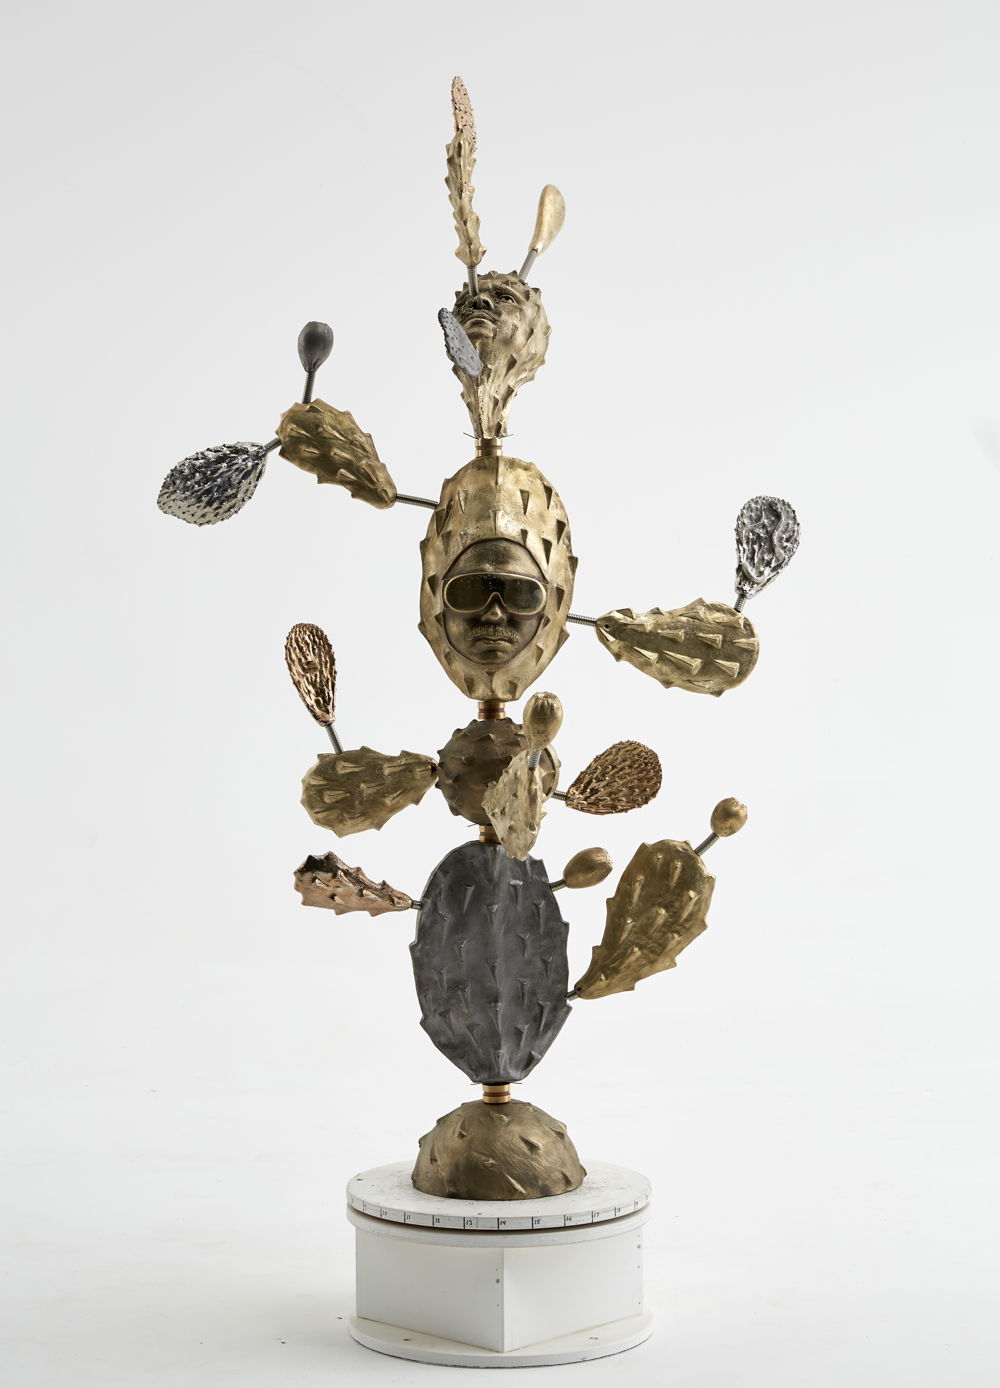 A totem-like brass sculpture with a combination of cast iron, gold and rose-gold plating prickly cactus paddles. The center figure is a cactus with a portrait of the artist wearing futuristic polished glasses.